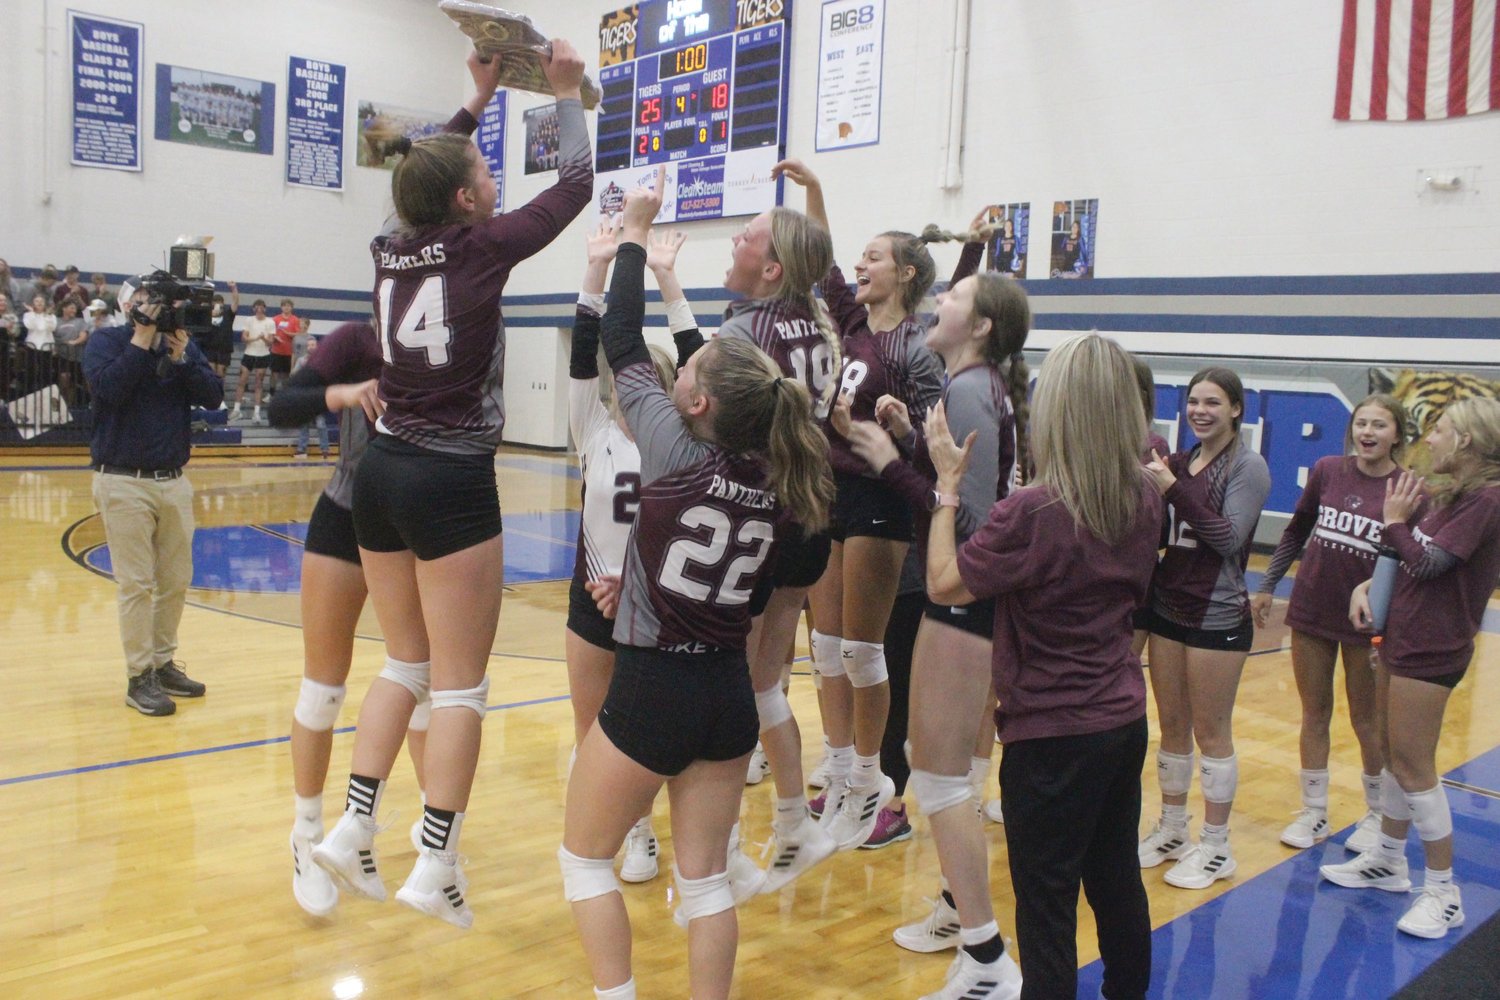 Senior Reagan Hoerning and her teammates go crazy after receiving their plaque.